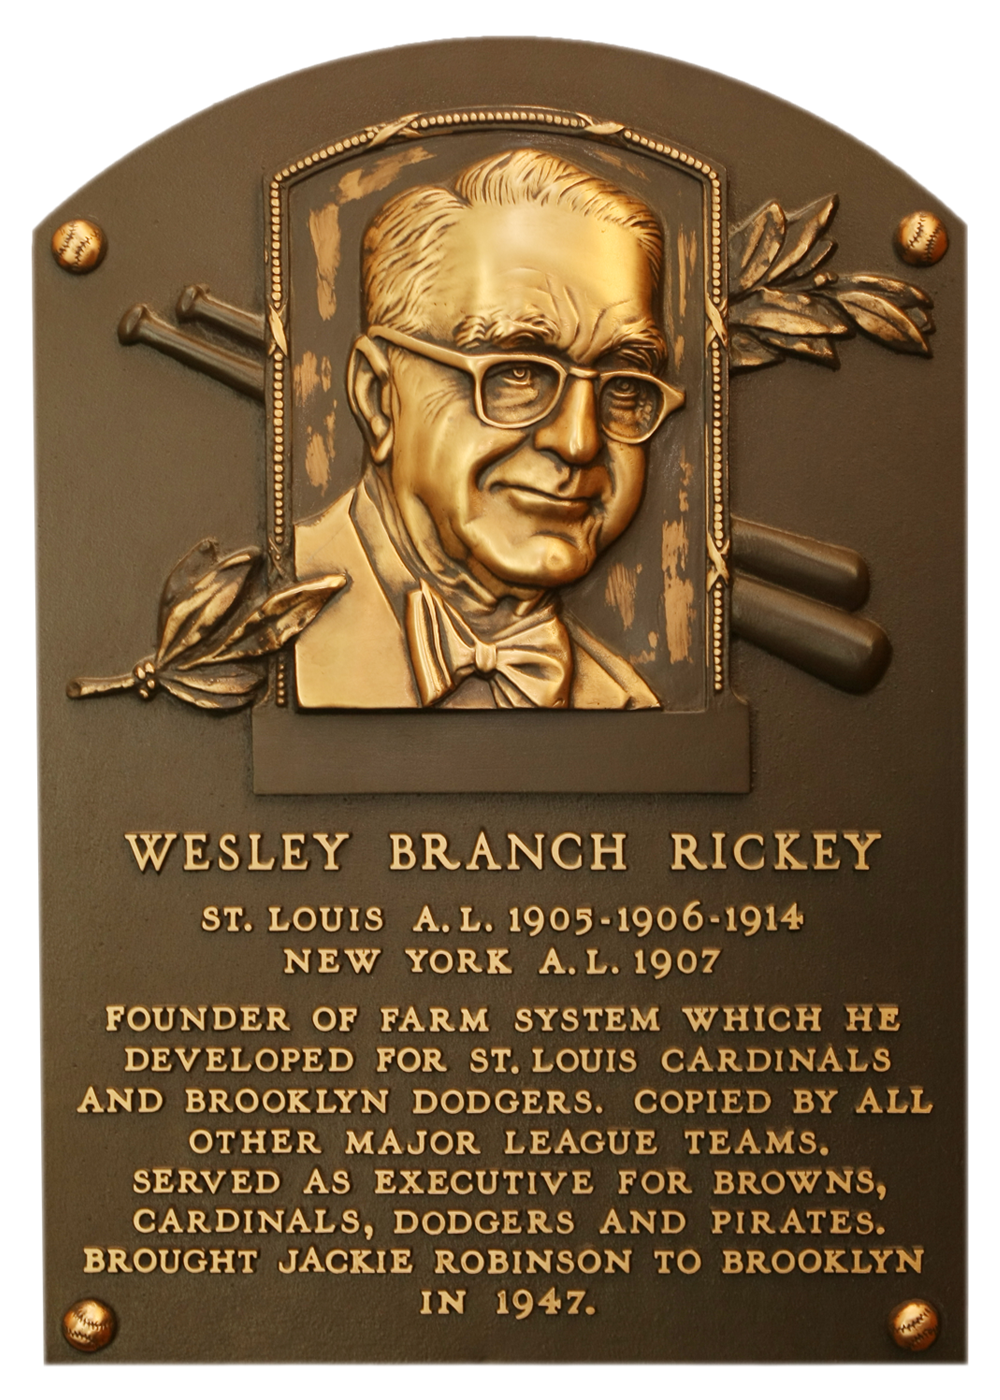 Branch Rickey Hall of Fame plaque